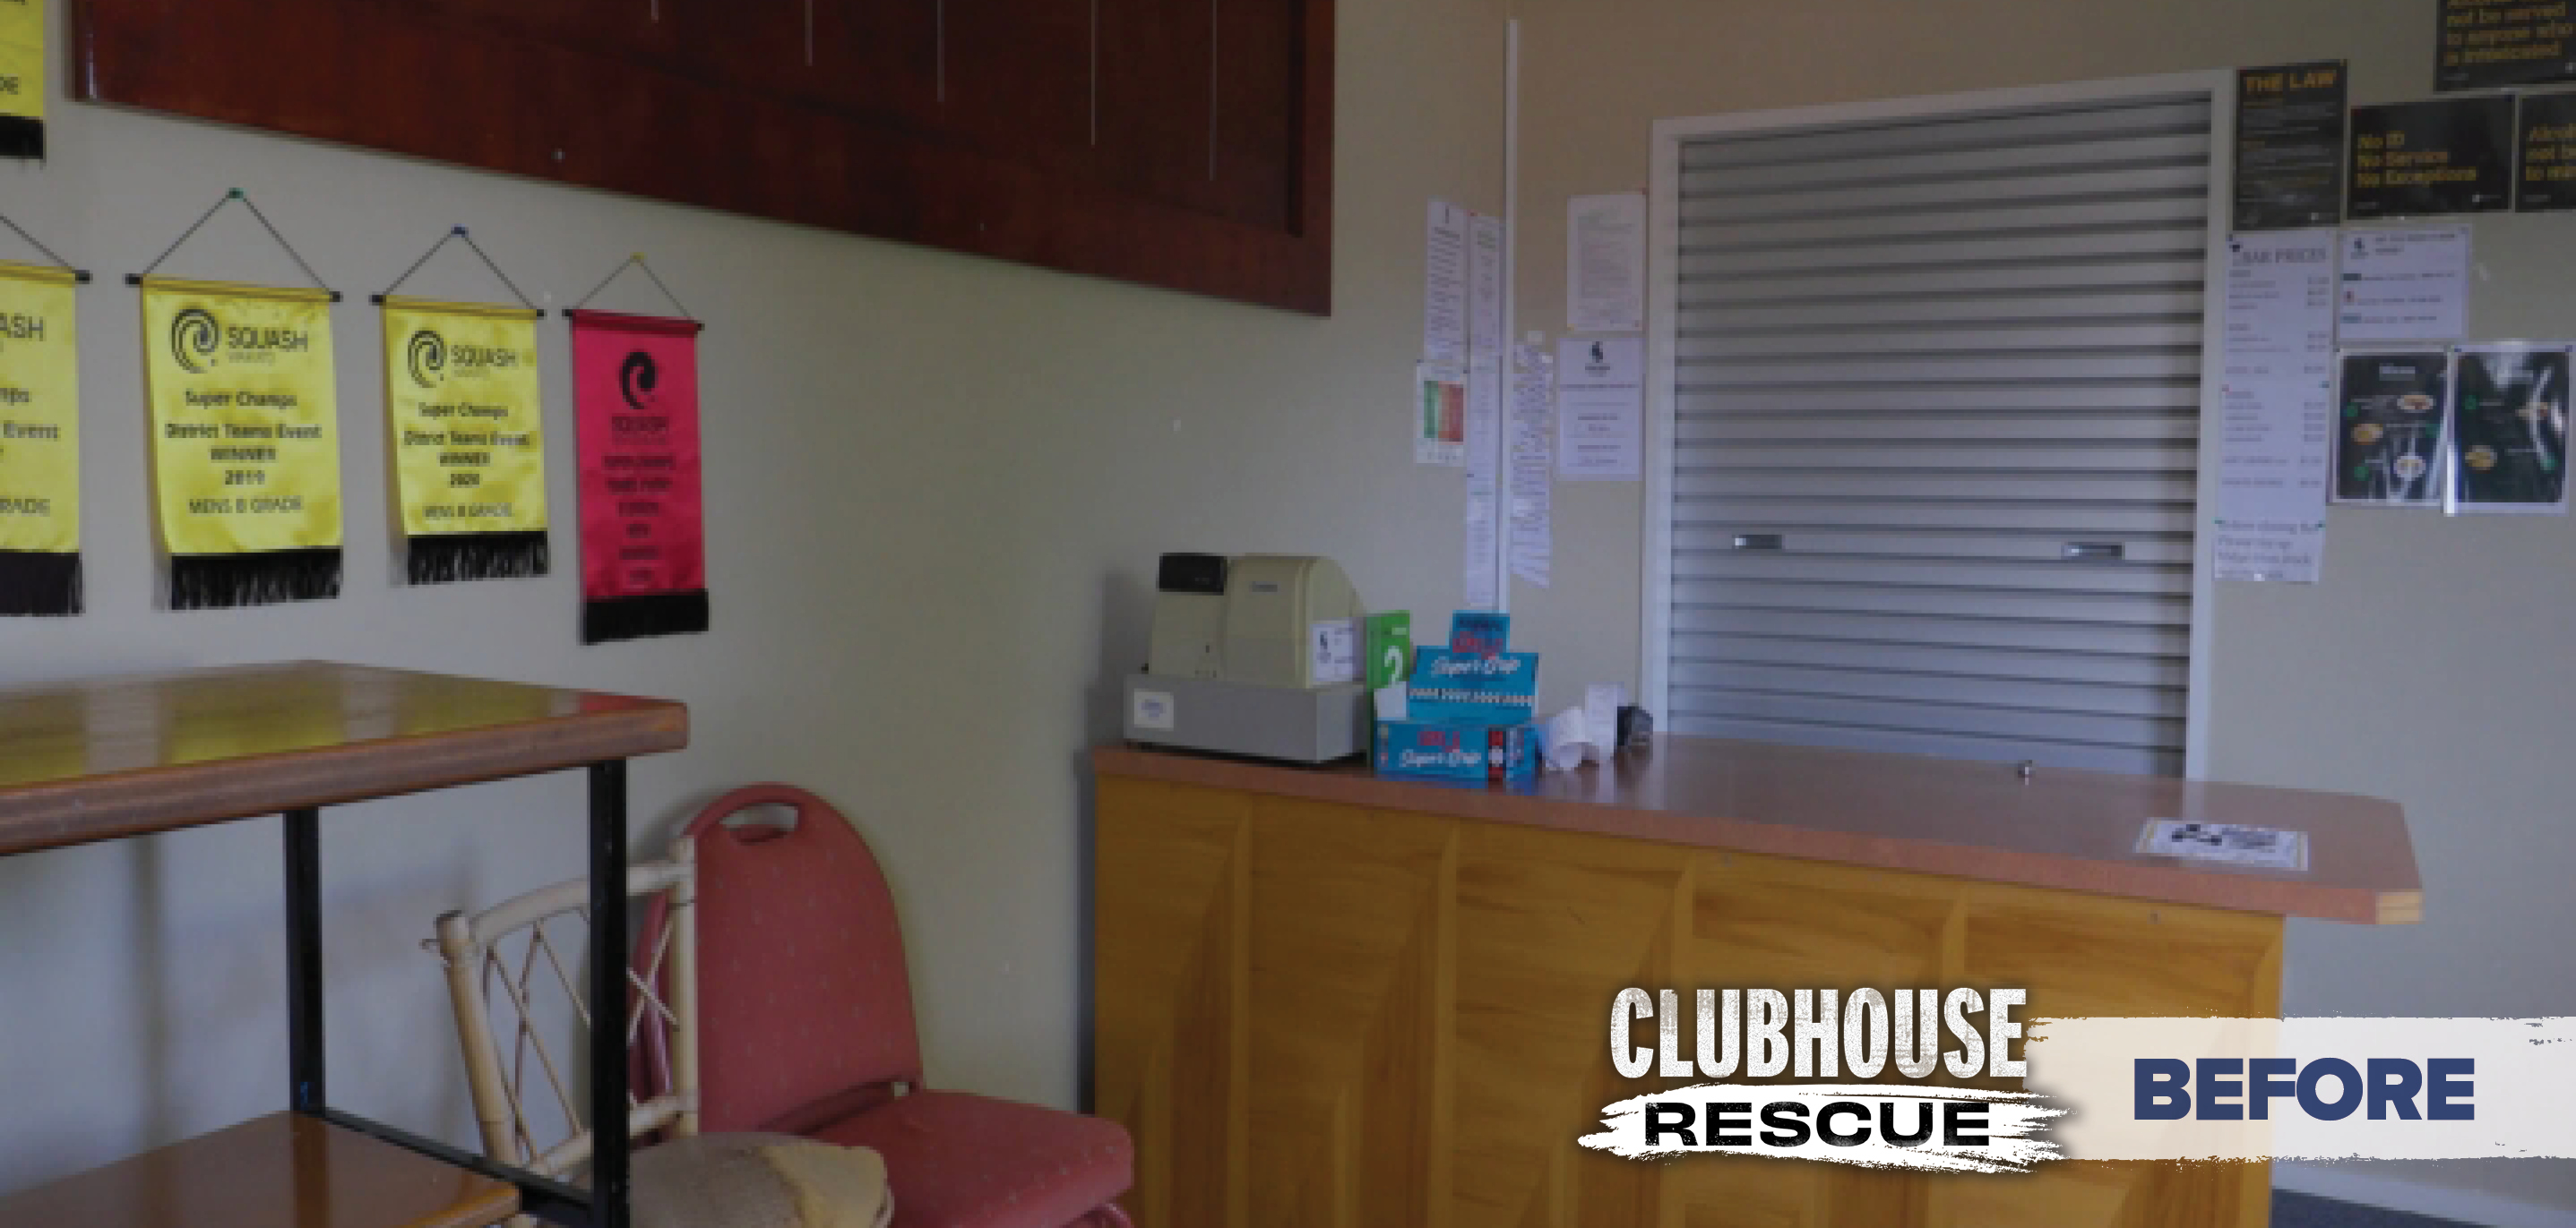 Clubhouse Ep 2 - Before Pic 9